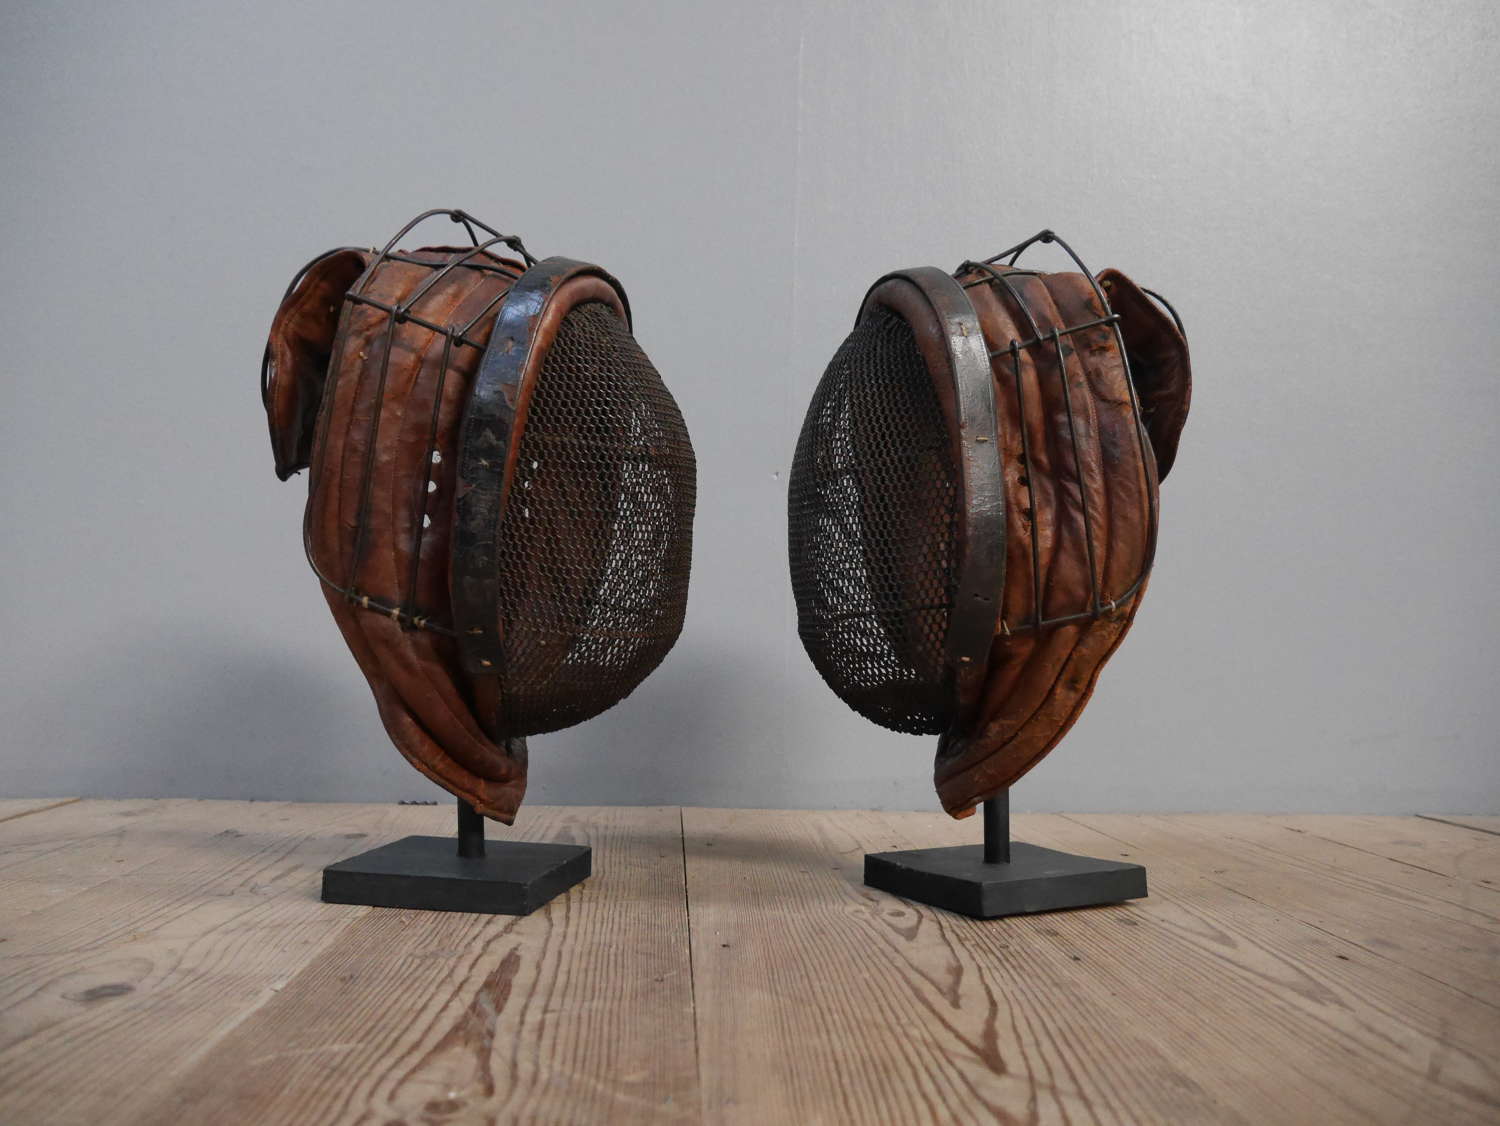 Pair of Leather Fencing Masks